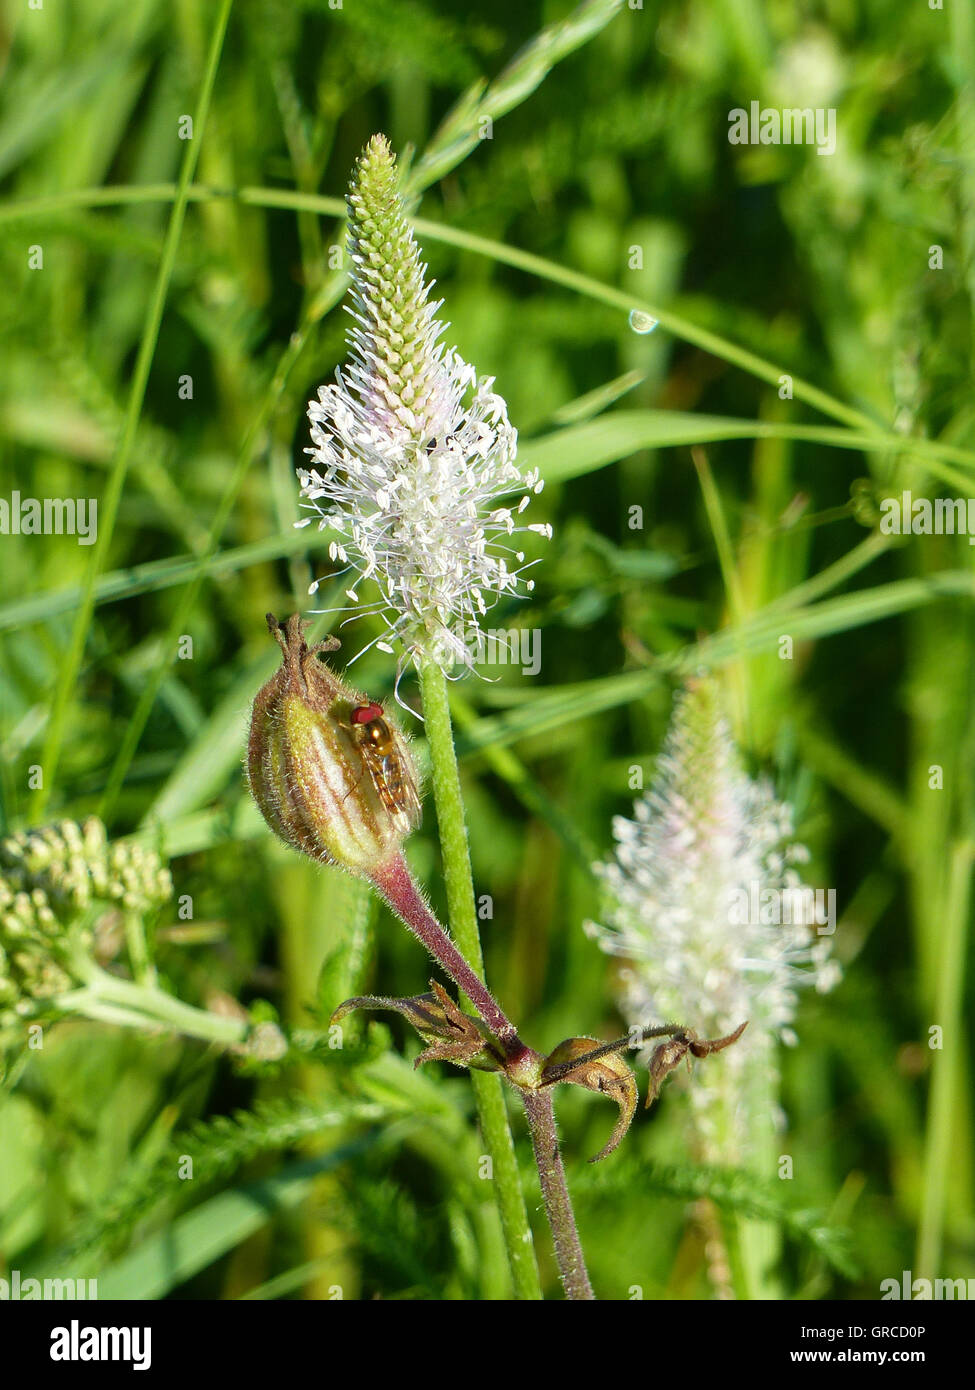 Hoary Plantain, Plantago Media, Flowering Plants With A Hoverfly, On A Meadow Stock Photo